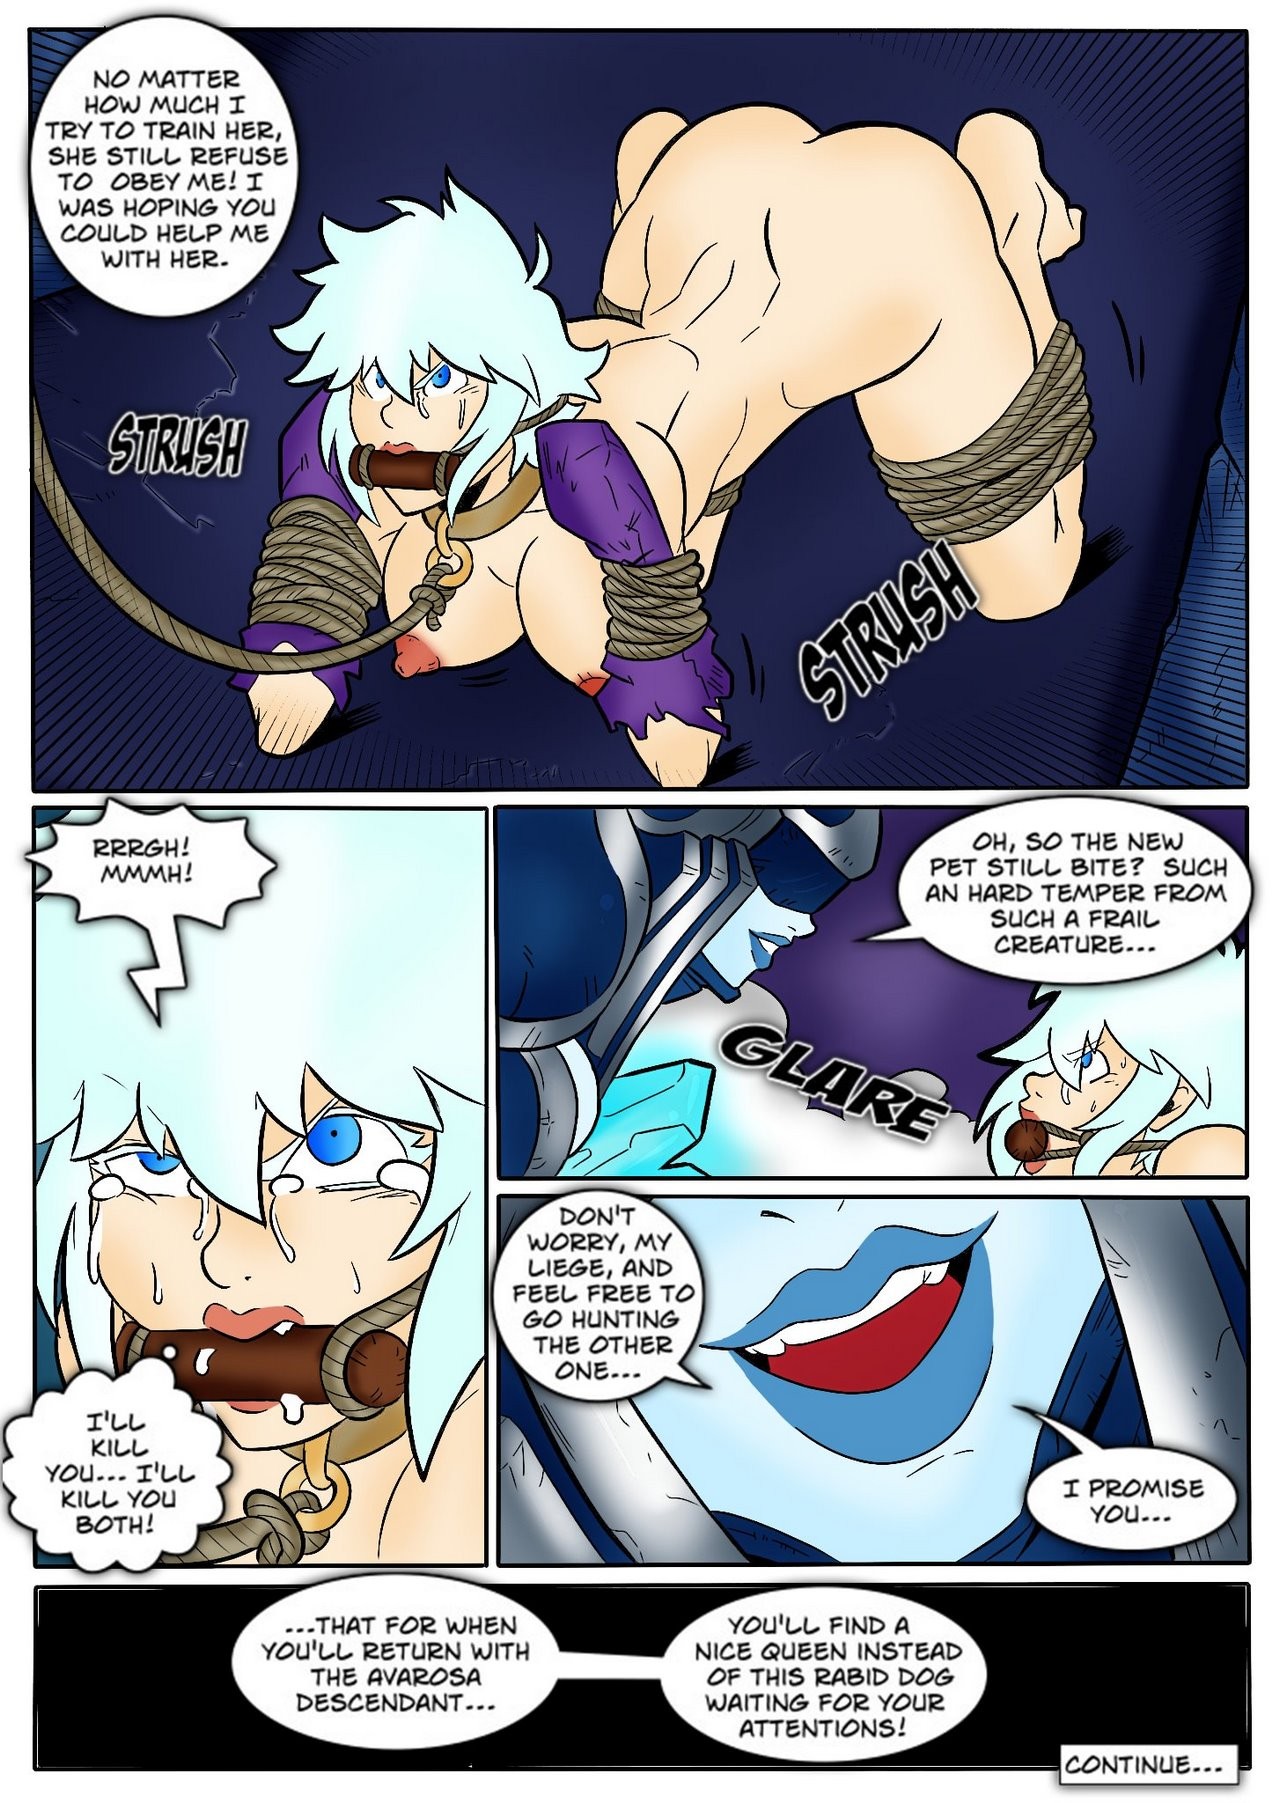 Tales of the Troll King ch. 1 - 3 ] [Colorized] porn comic picture 34